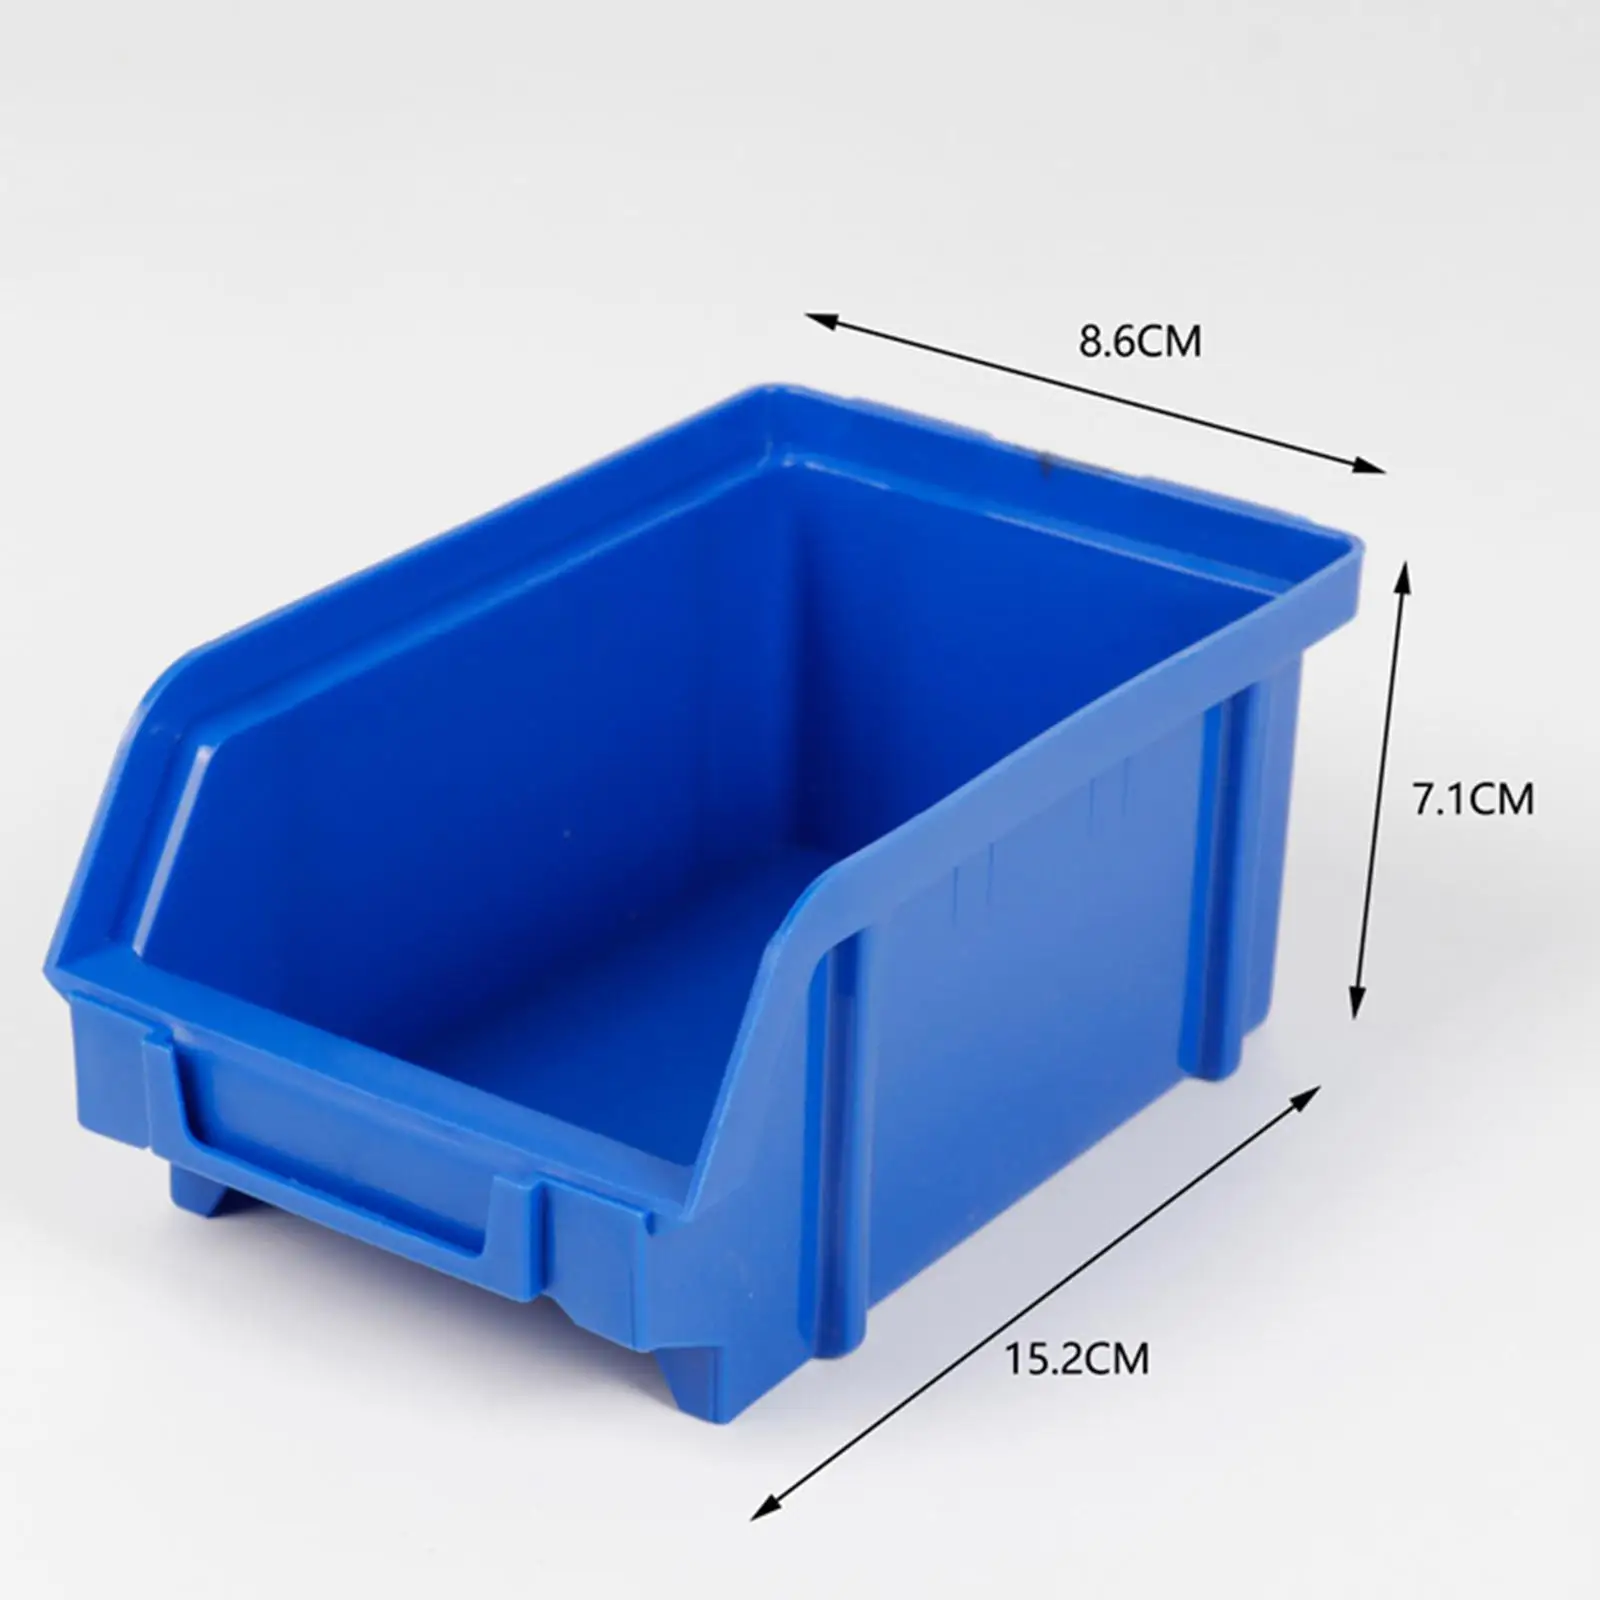 10Pcs Heavy Duty Storage Bins Containers Mounted Backboard Hardware Parts Tray Tool Parts Organizers for Warehouse Garage Shop